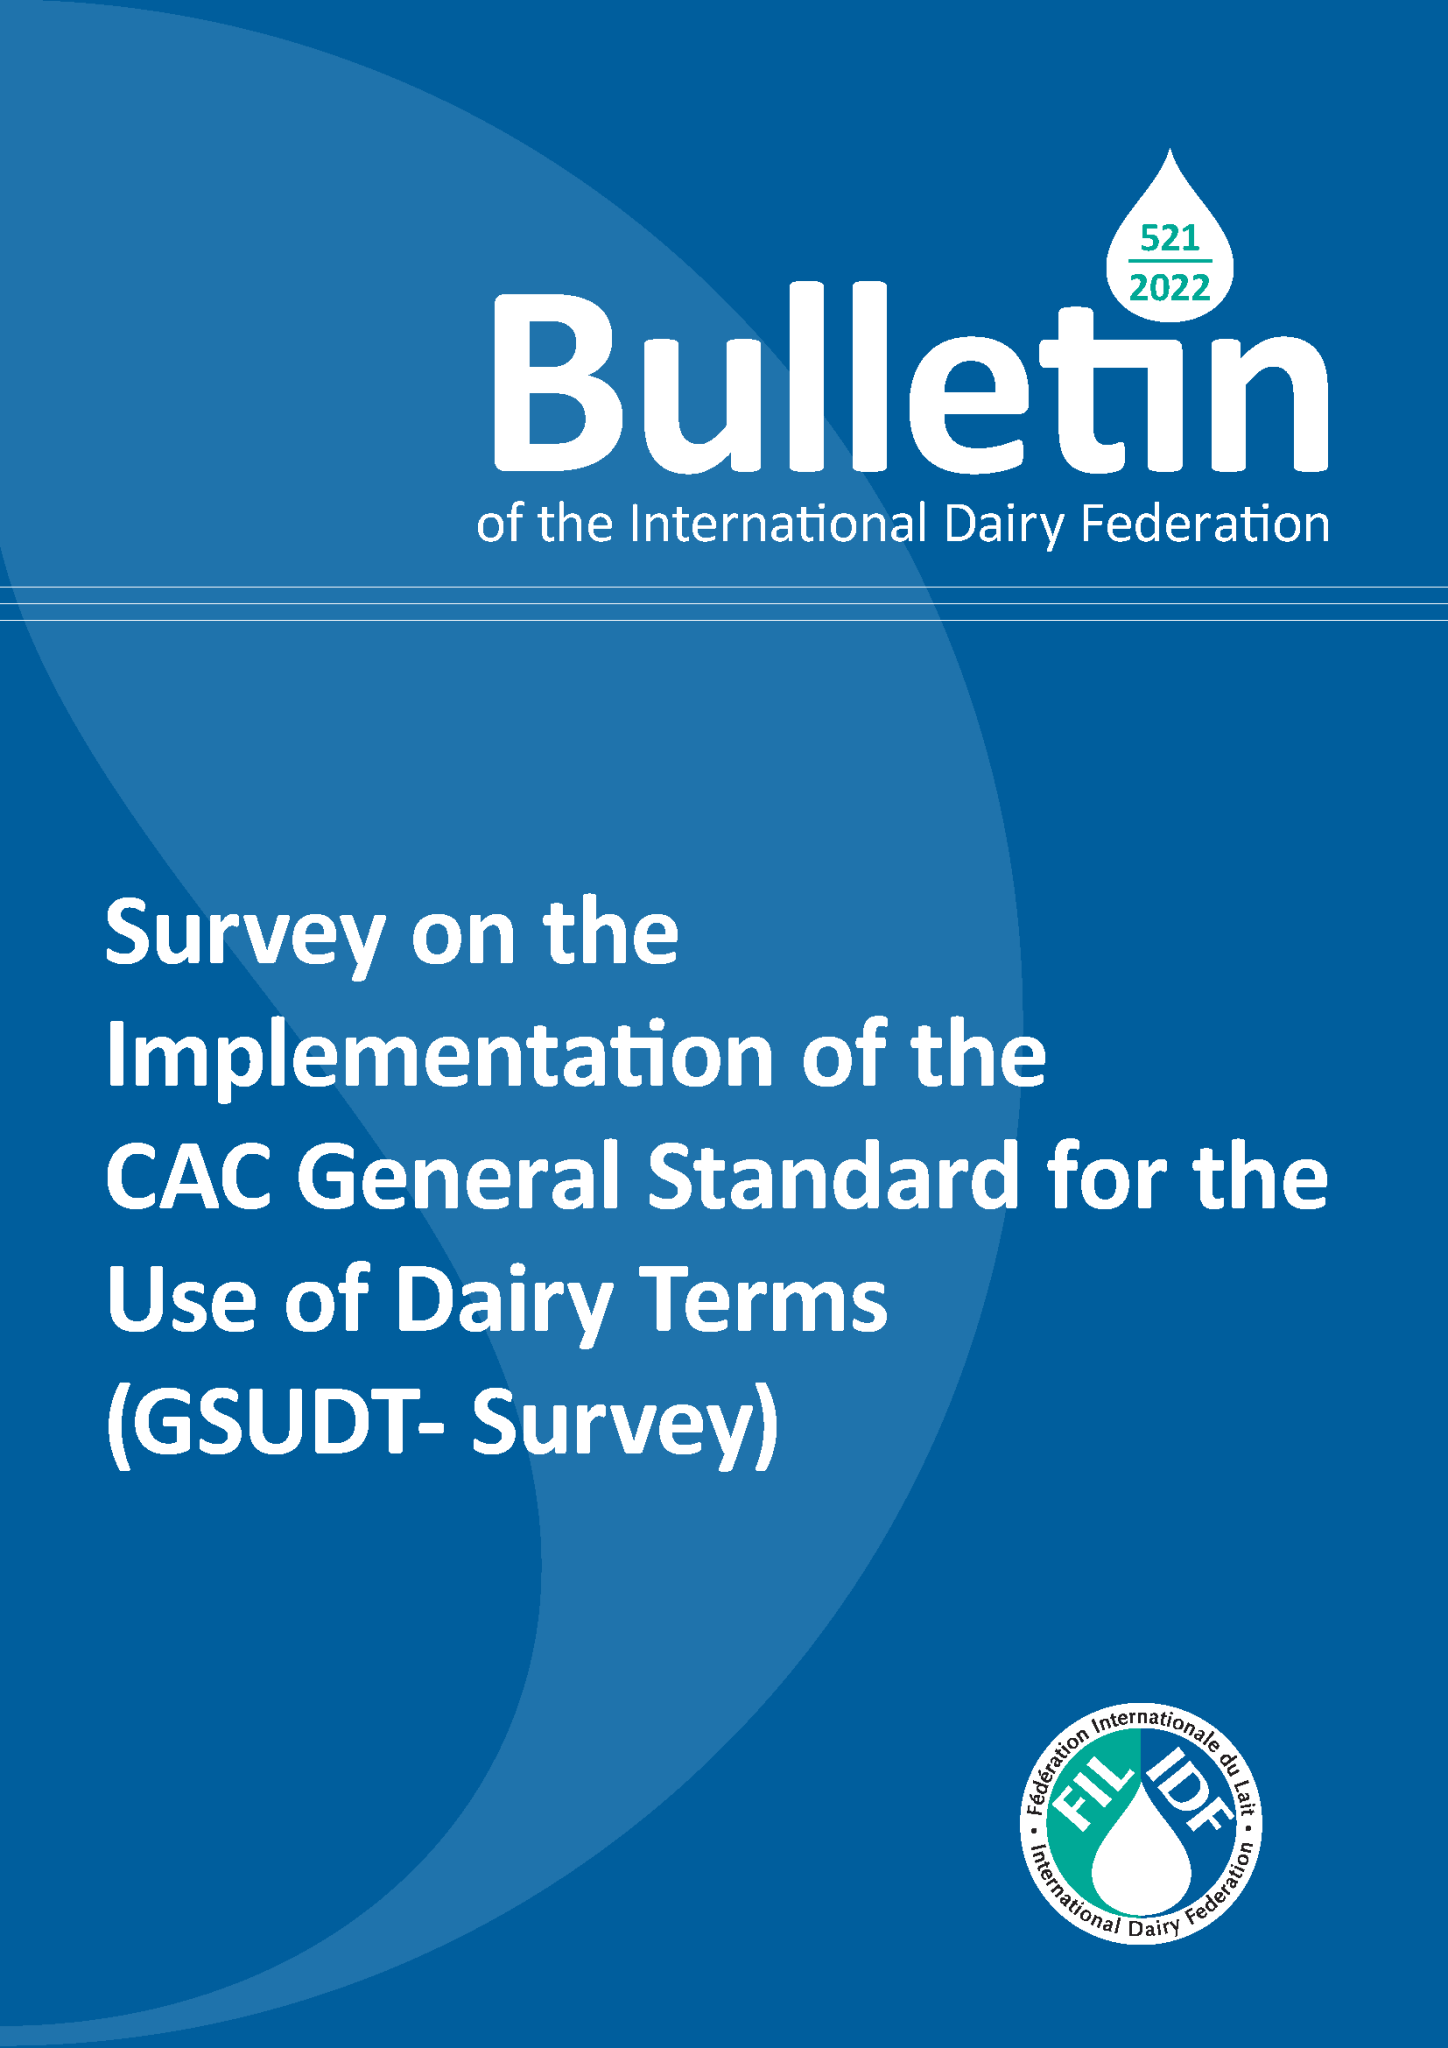 Bulletin of the IDF N°521/2022: Survey on the Implementation of the CAC General Standard for the Use of Dairy Terms (GSUDT- Survey) - FIL-IDF